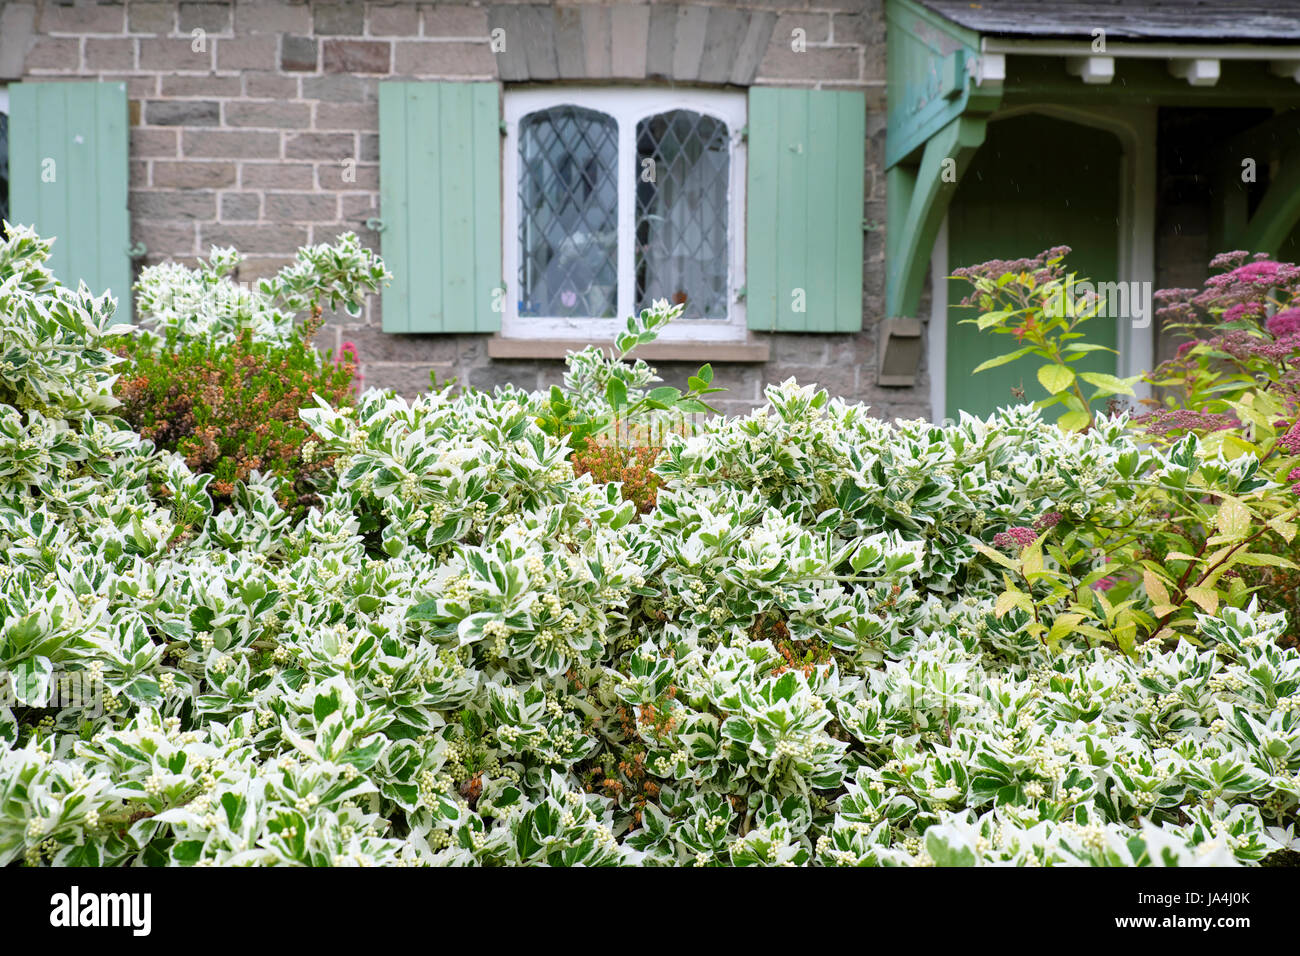 Euonymus fortunei Silver Queen shrub growing as a hedge in front of building with green shutters in Hay-on-Wye, Wales UK  KATHY DEWITT Stock Photo